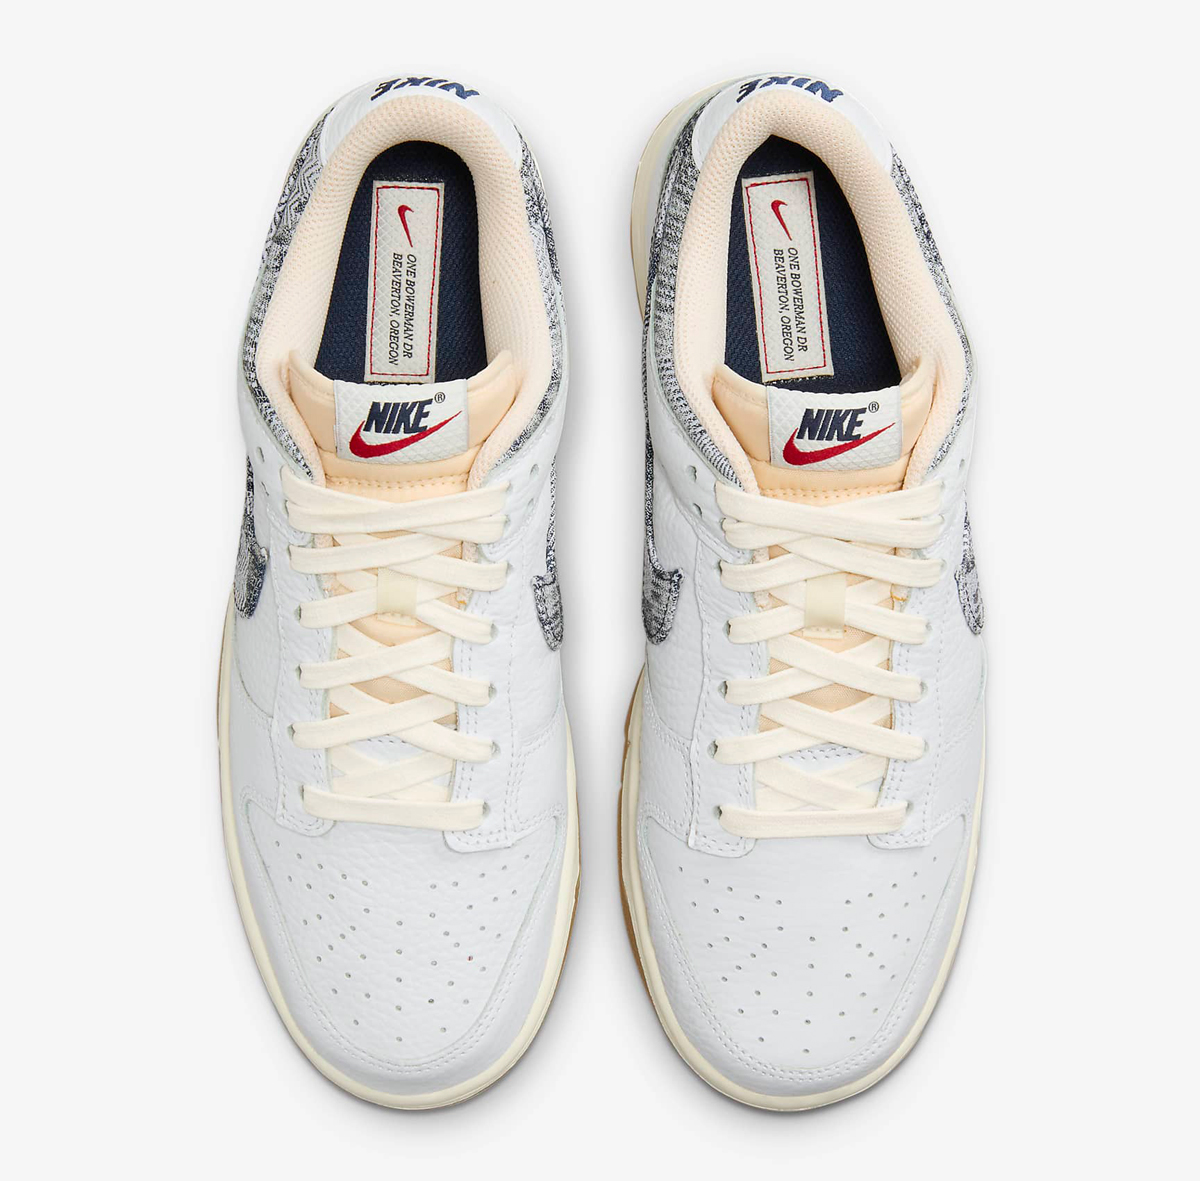 Nike-Dunk-Low-Washed-Denim-Release-Date-4